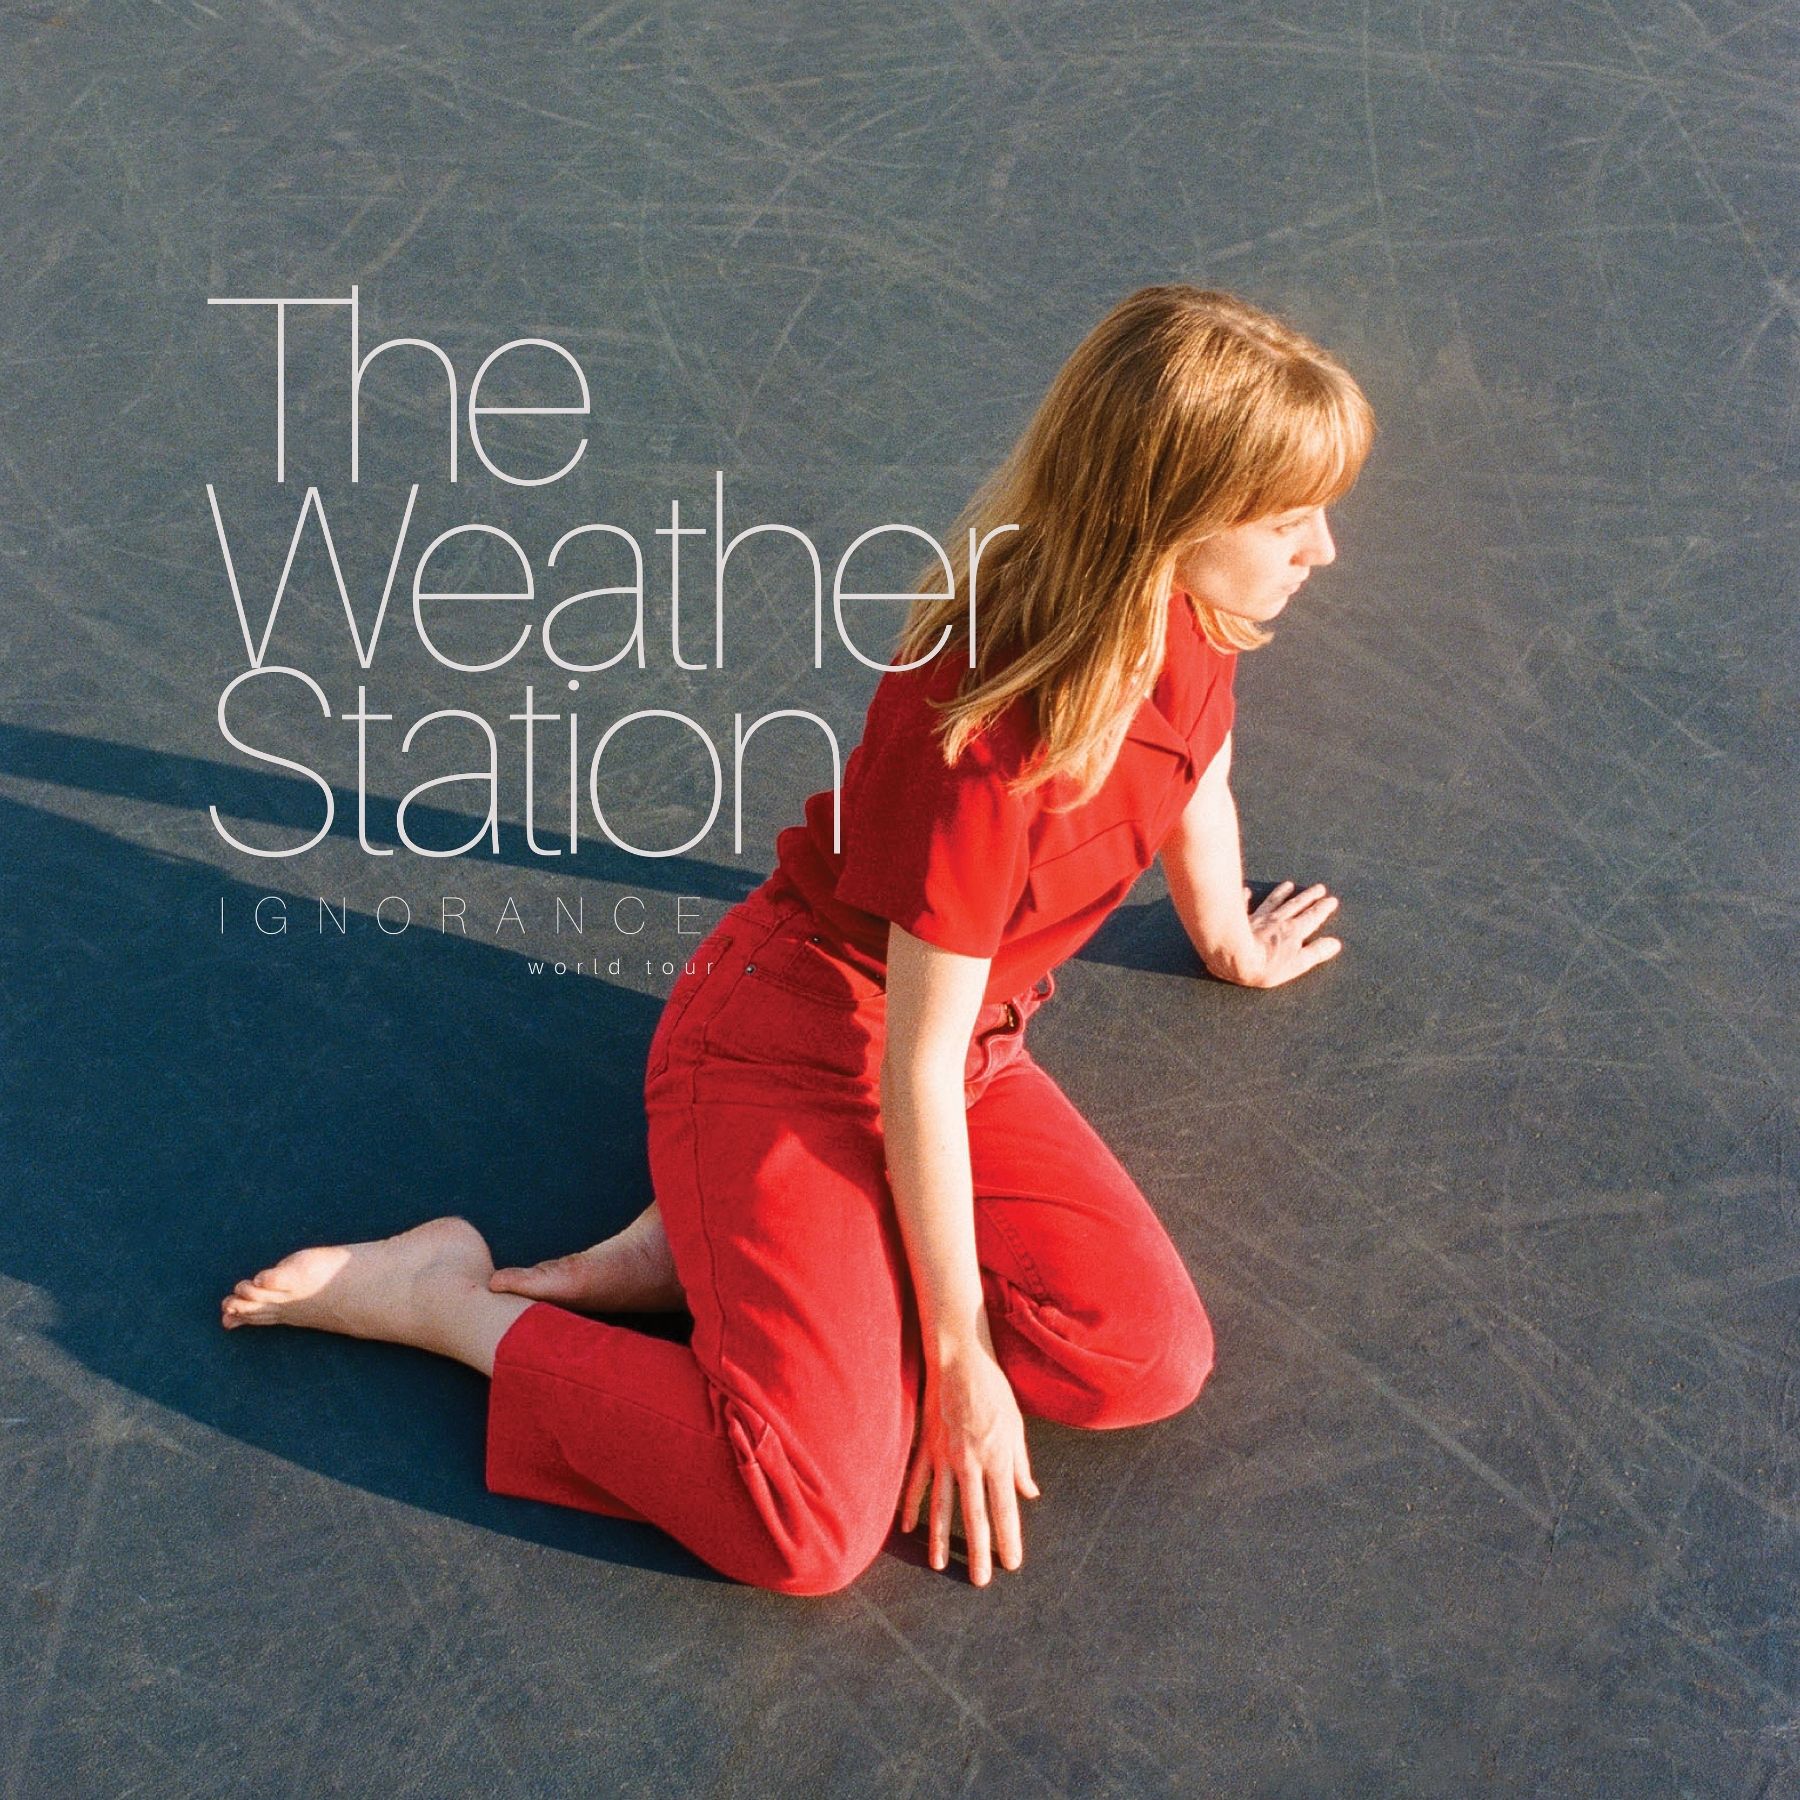 The Weather Station Ignorance World Tour Presented by the Artesian